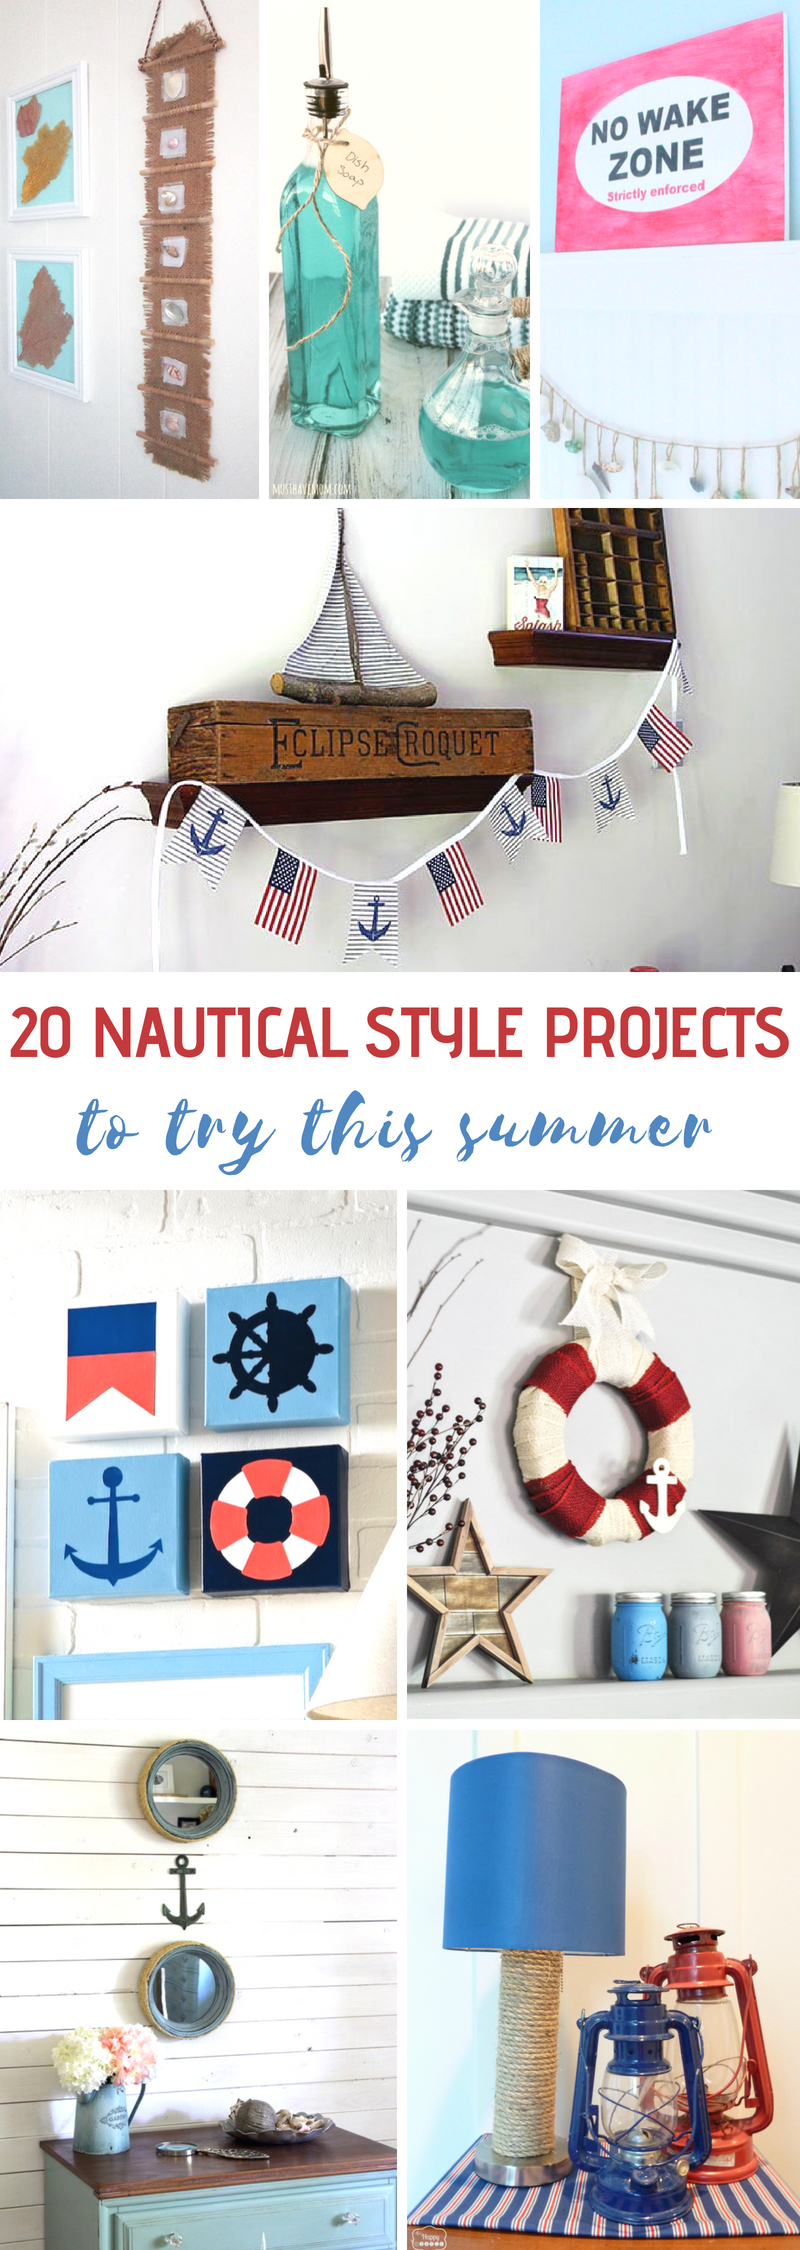 Nautical Style Projects To Try This Summer 